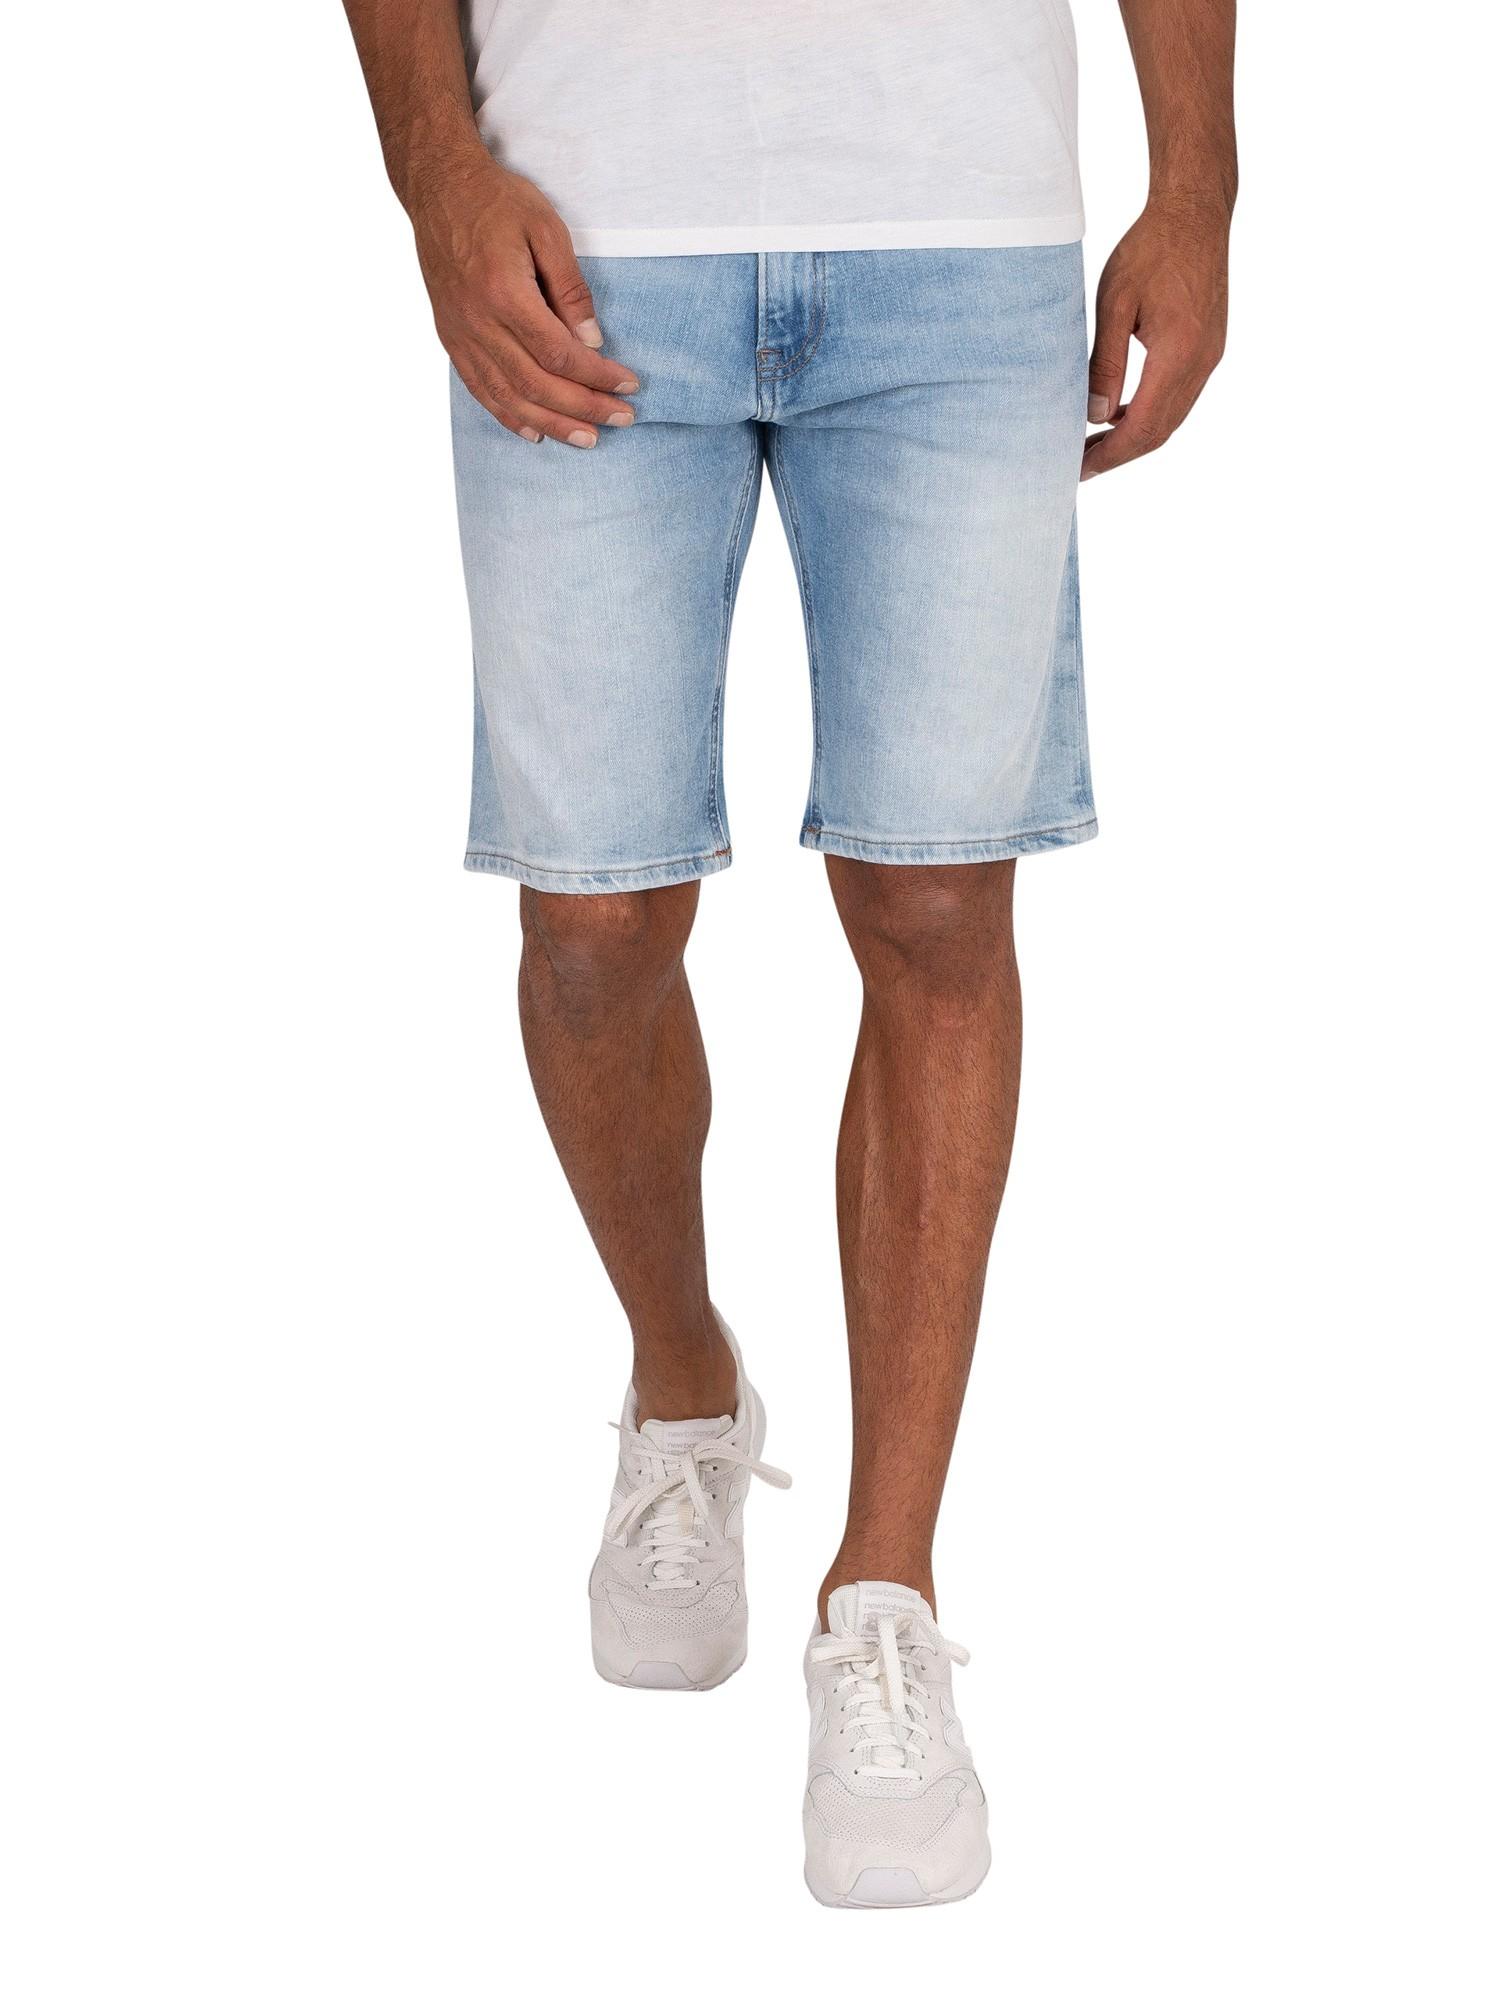 Tommy Jeans Scanton Short Online - anuariocidob.org 1688006244